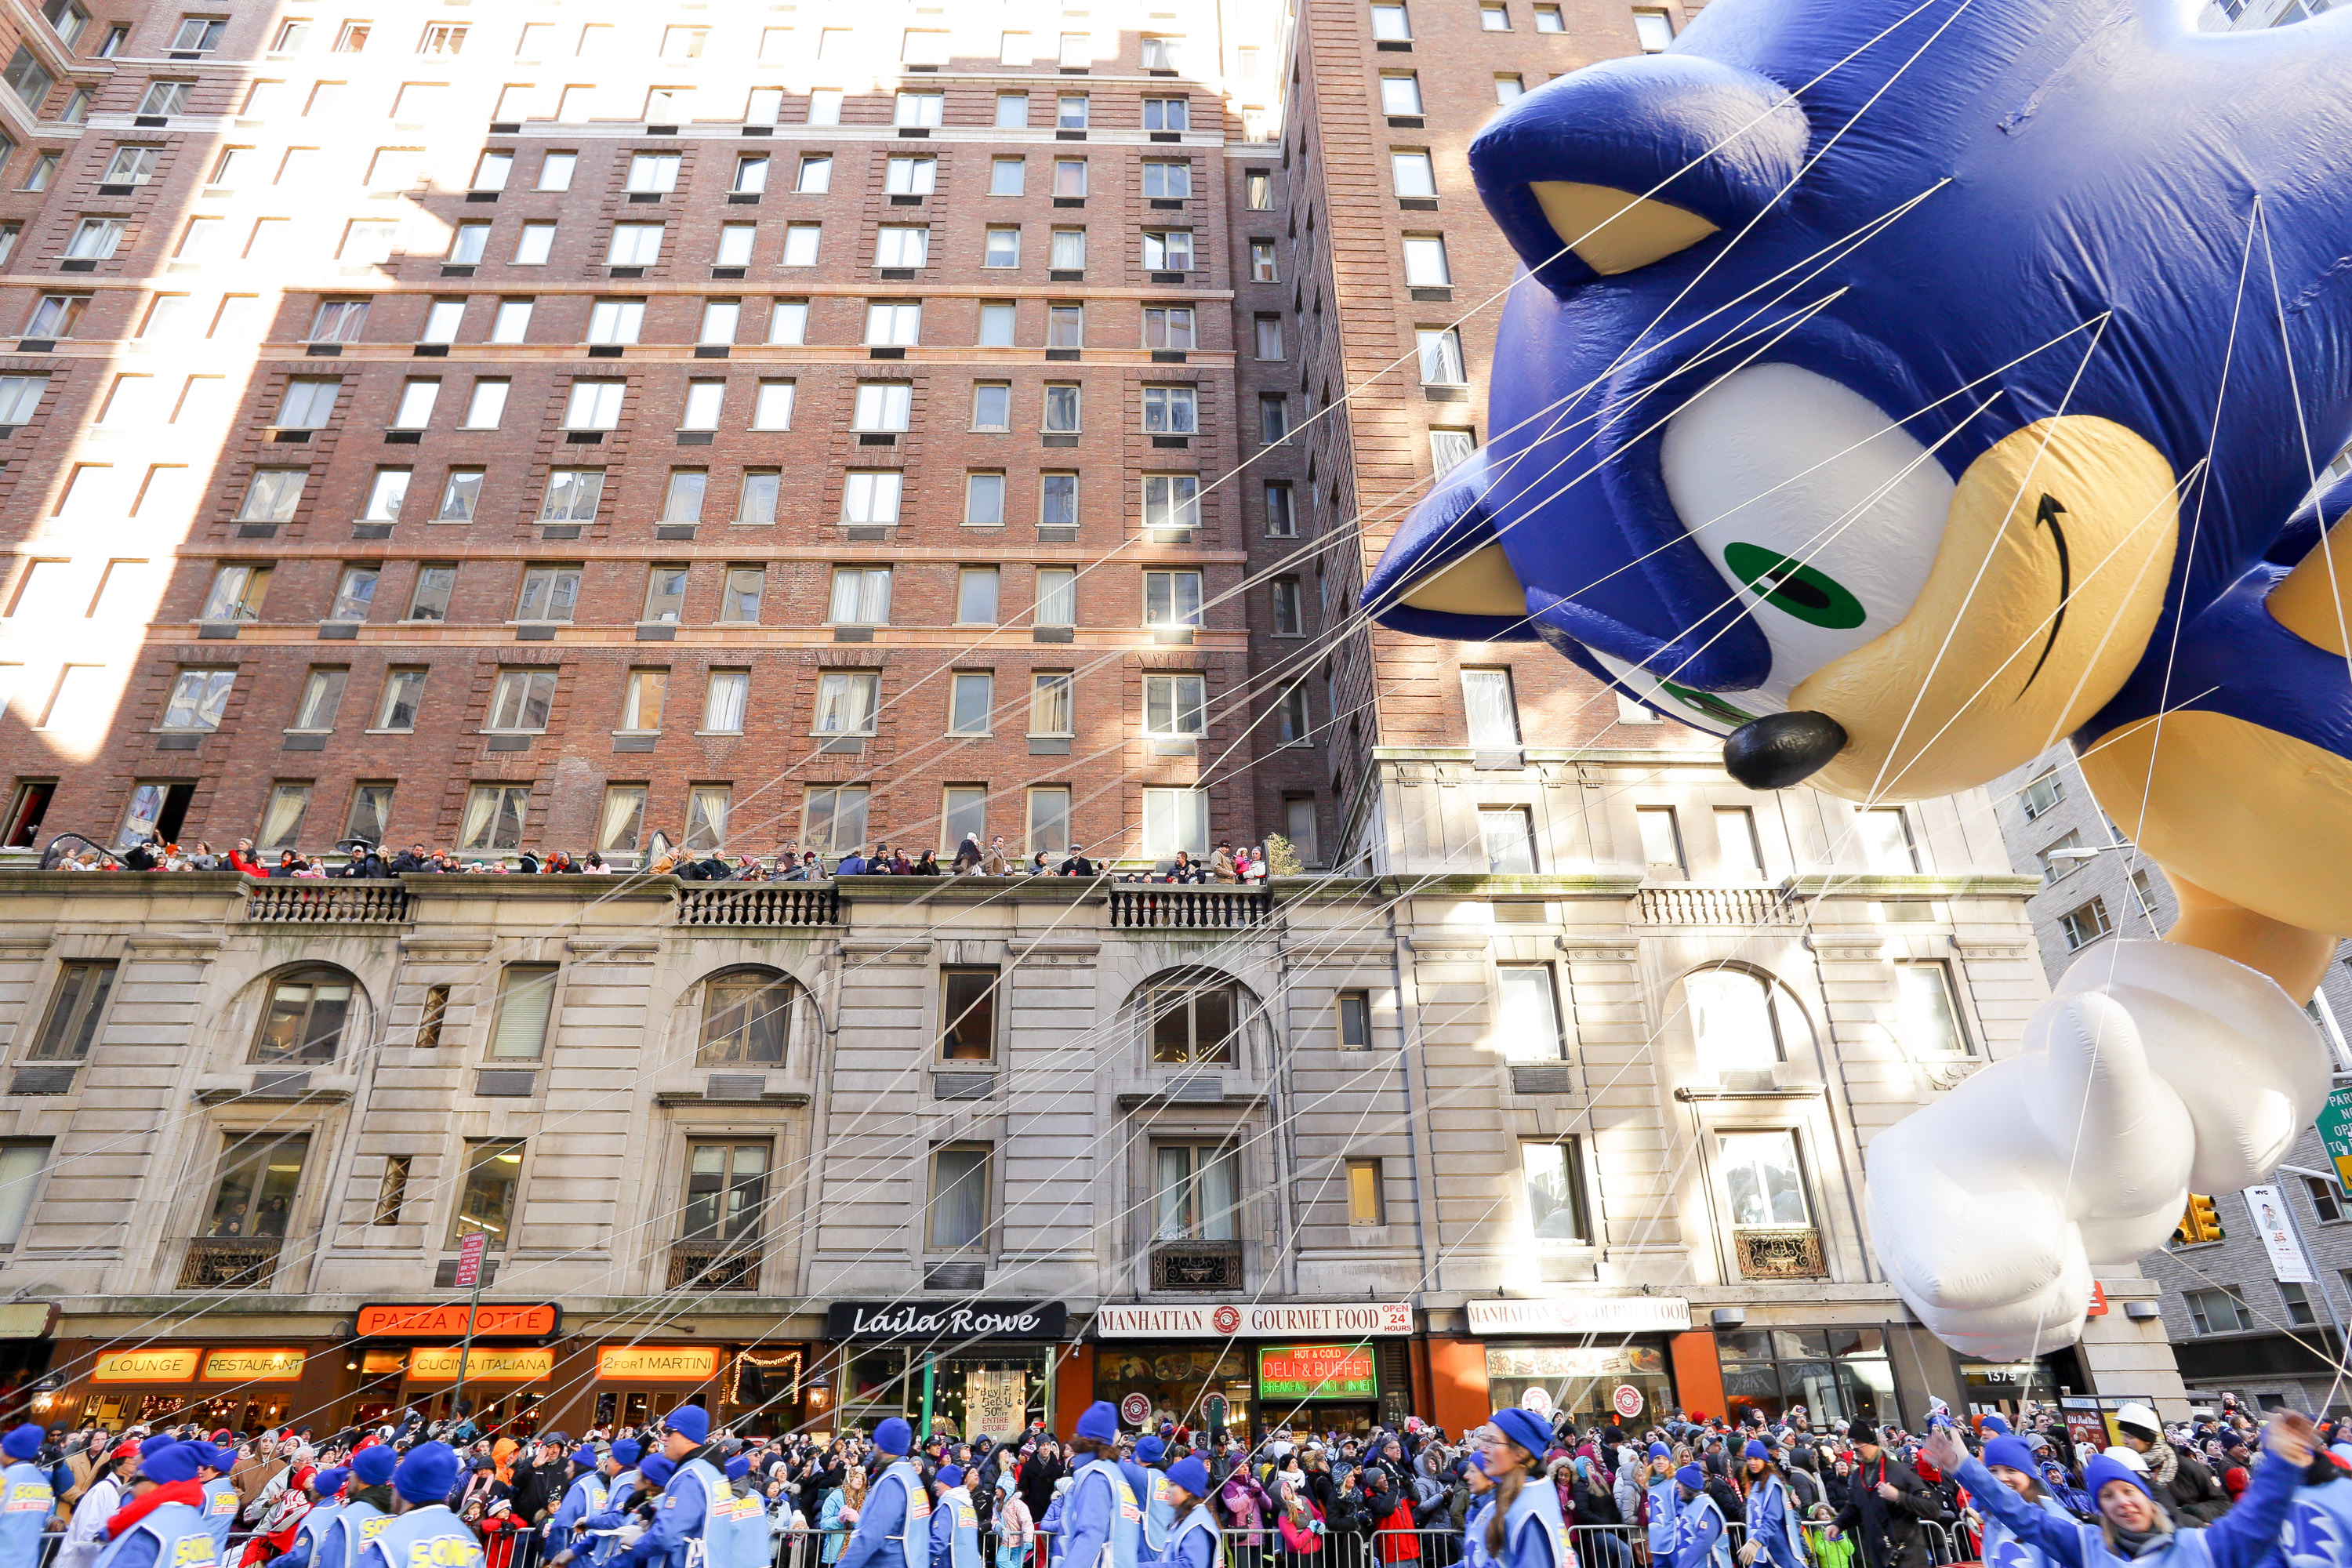 The Sonic the Hedgehog balloon is seen during the 87th Annual Macy's Thanksgiving Day Parade on November 28, 2013 in New York City. (Andrew Toth&mdash;2013 Getty Images)